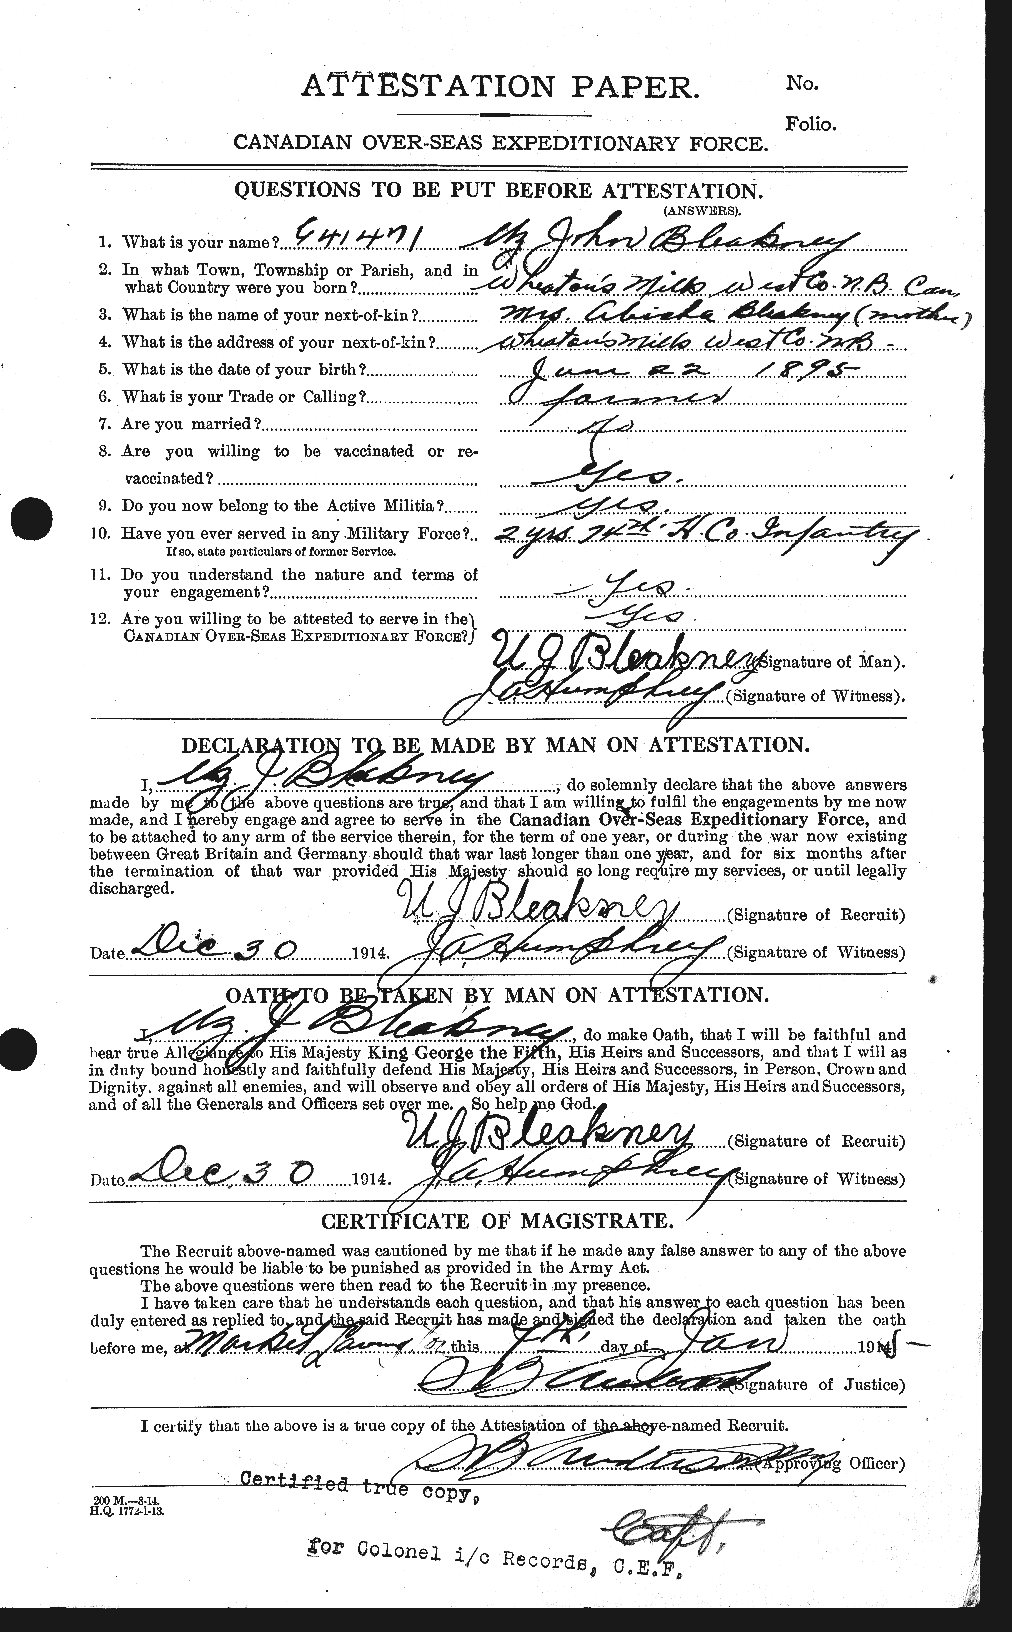 Personnel Records of the First World War - CEF 247898a